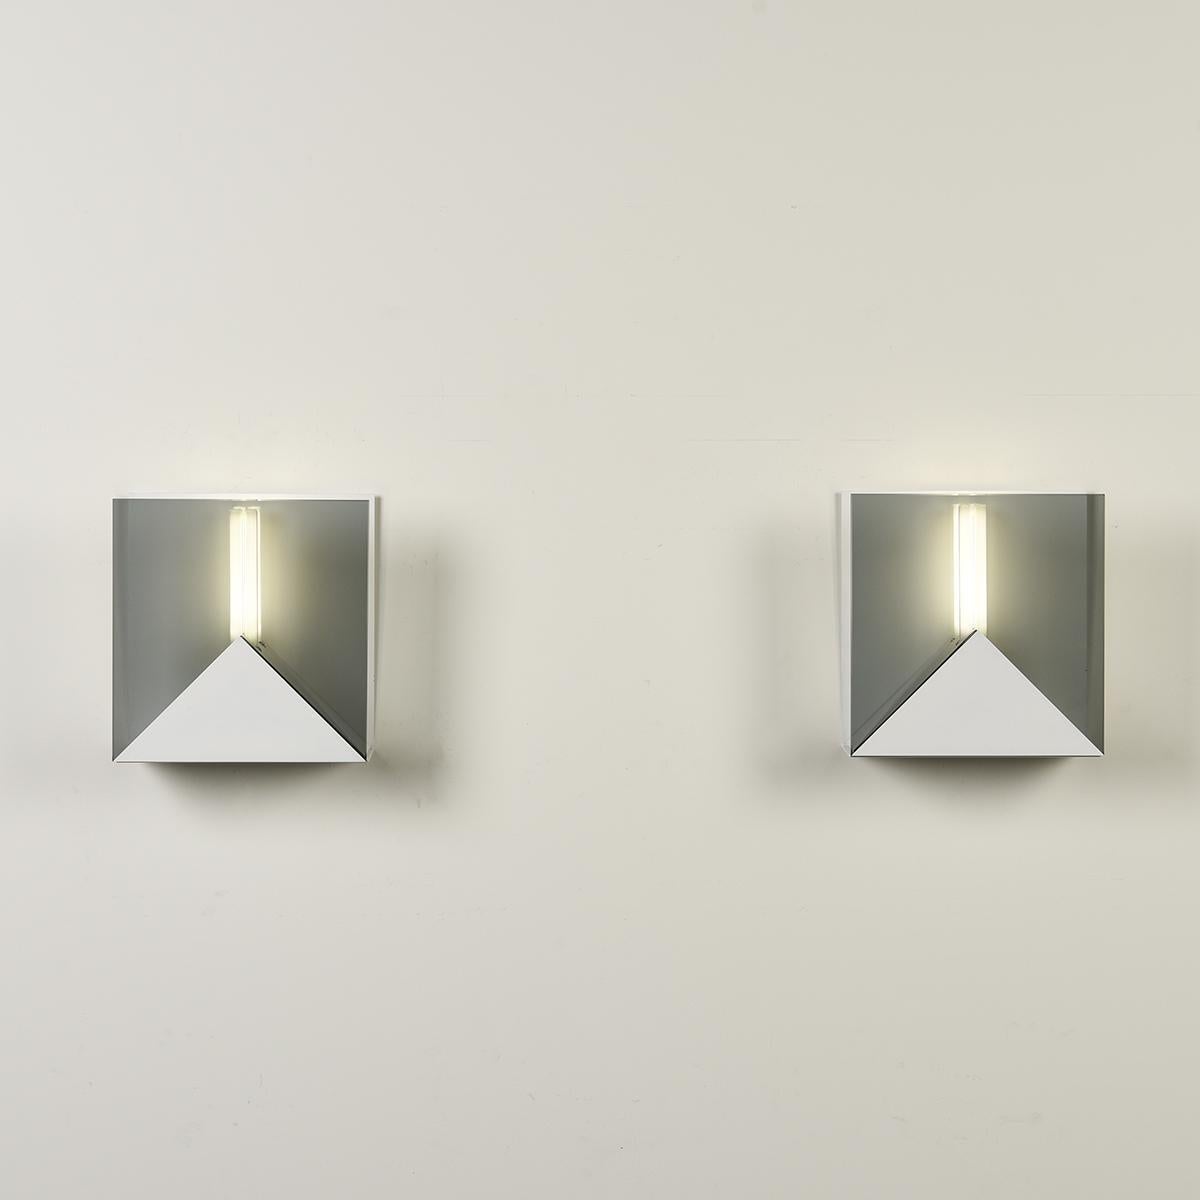 Post-Modern Pair of Smoked glass wall lamps 20620, Verre Lumière ed., circa 1975 For Sale